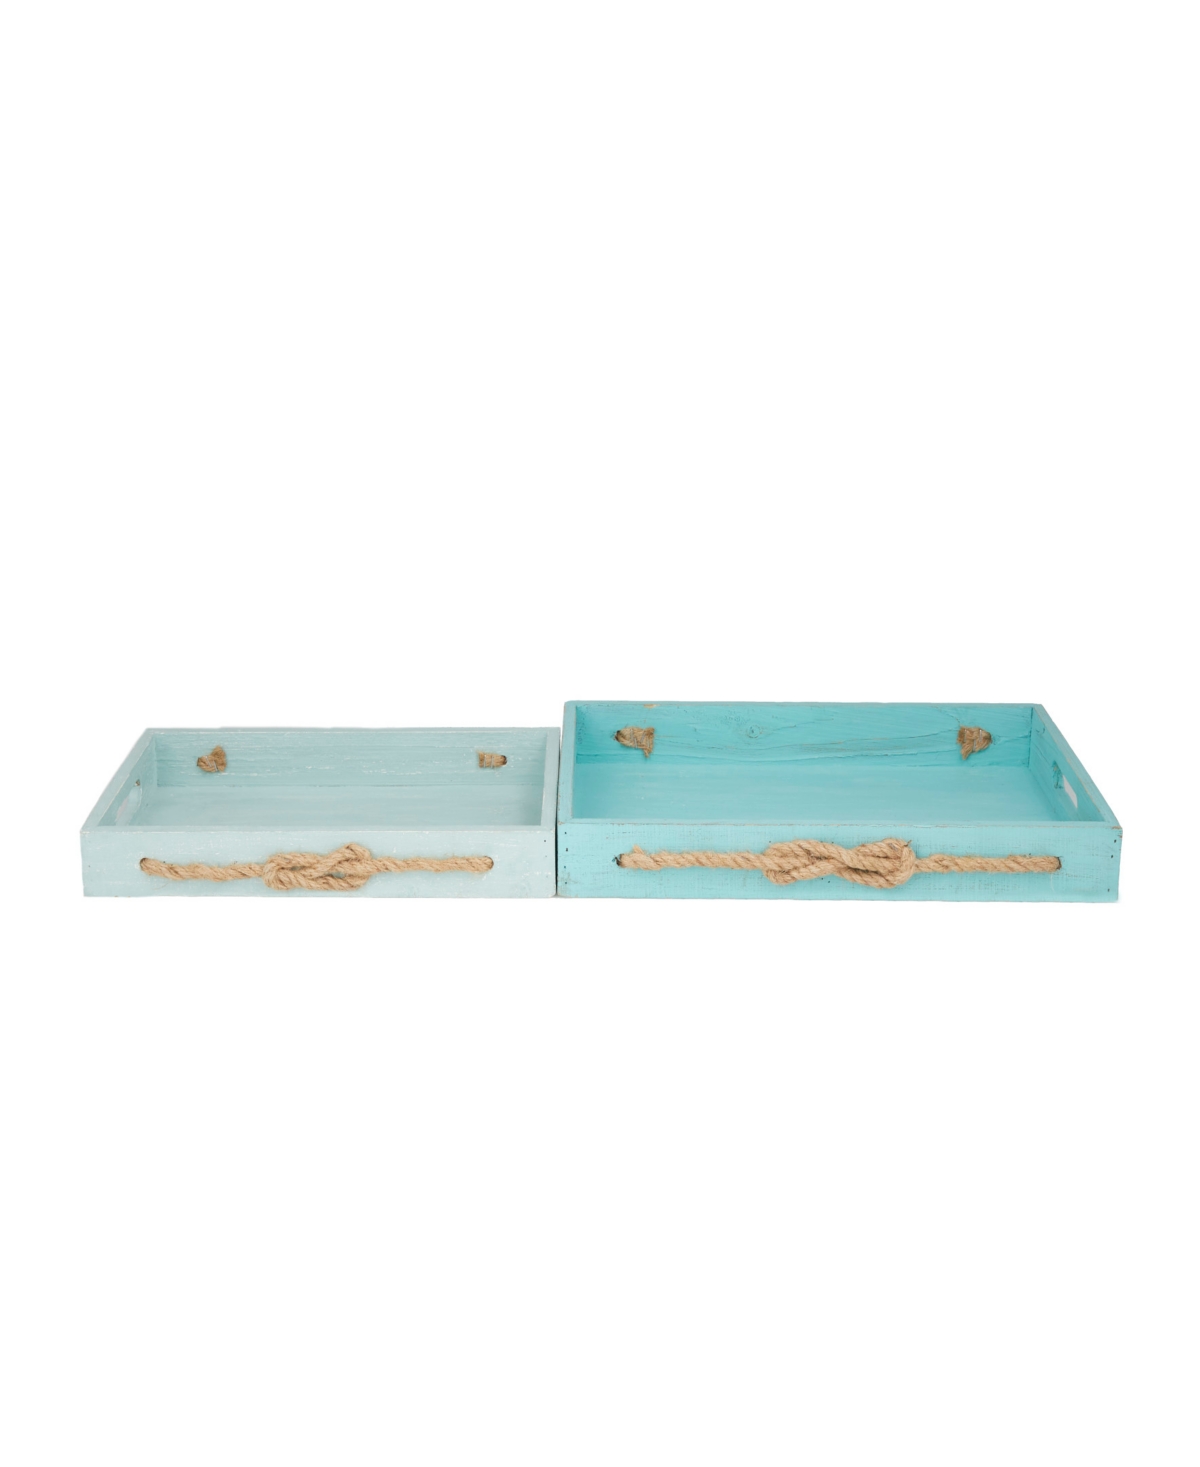 Rosemary Lane Wood Tray With Rope Accents, Set Of 2, 19", 16" W In Blue